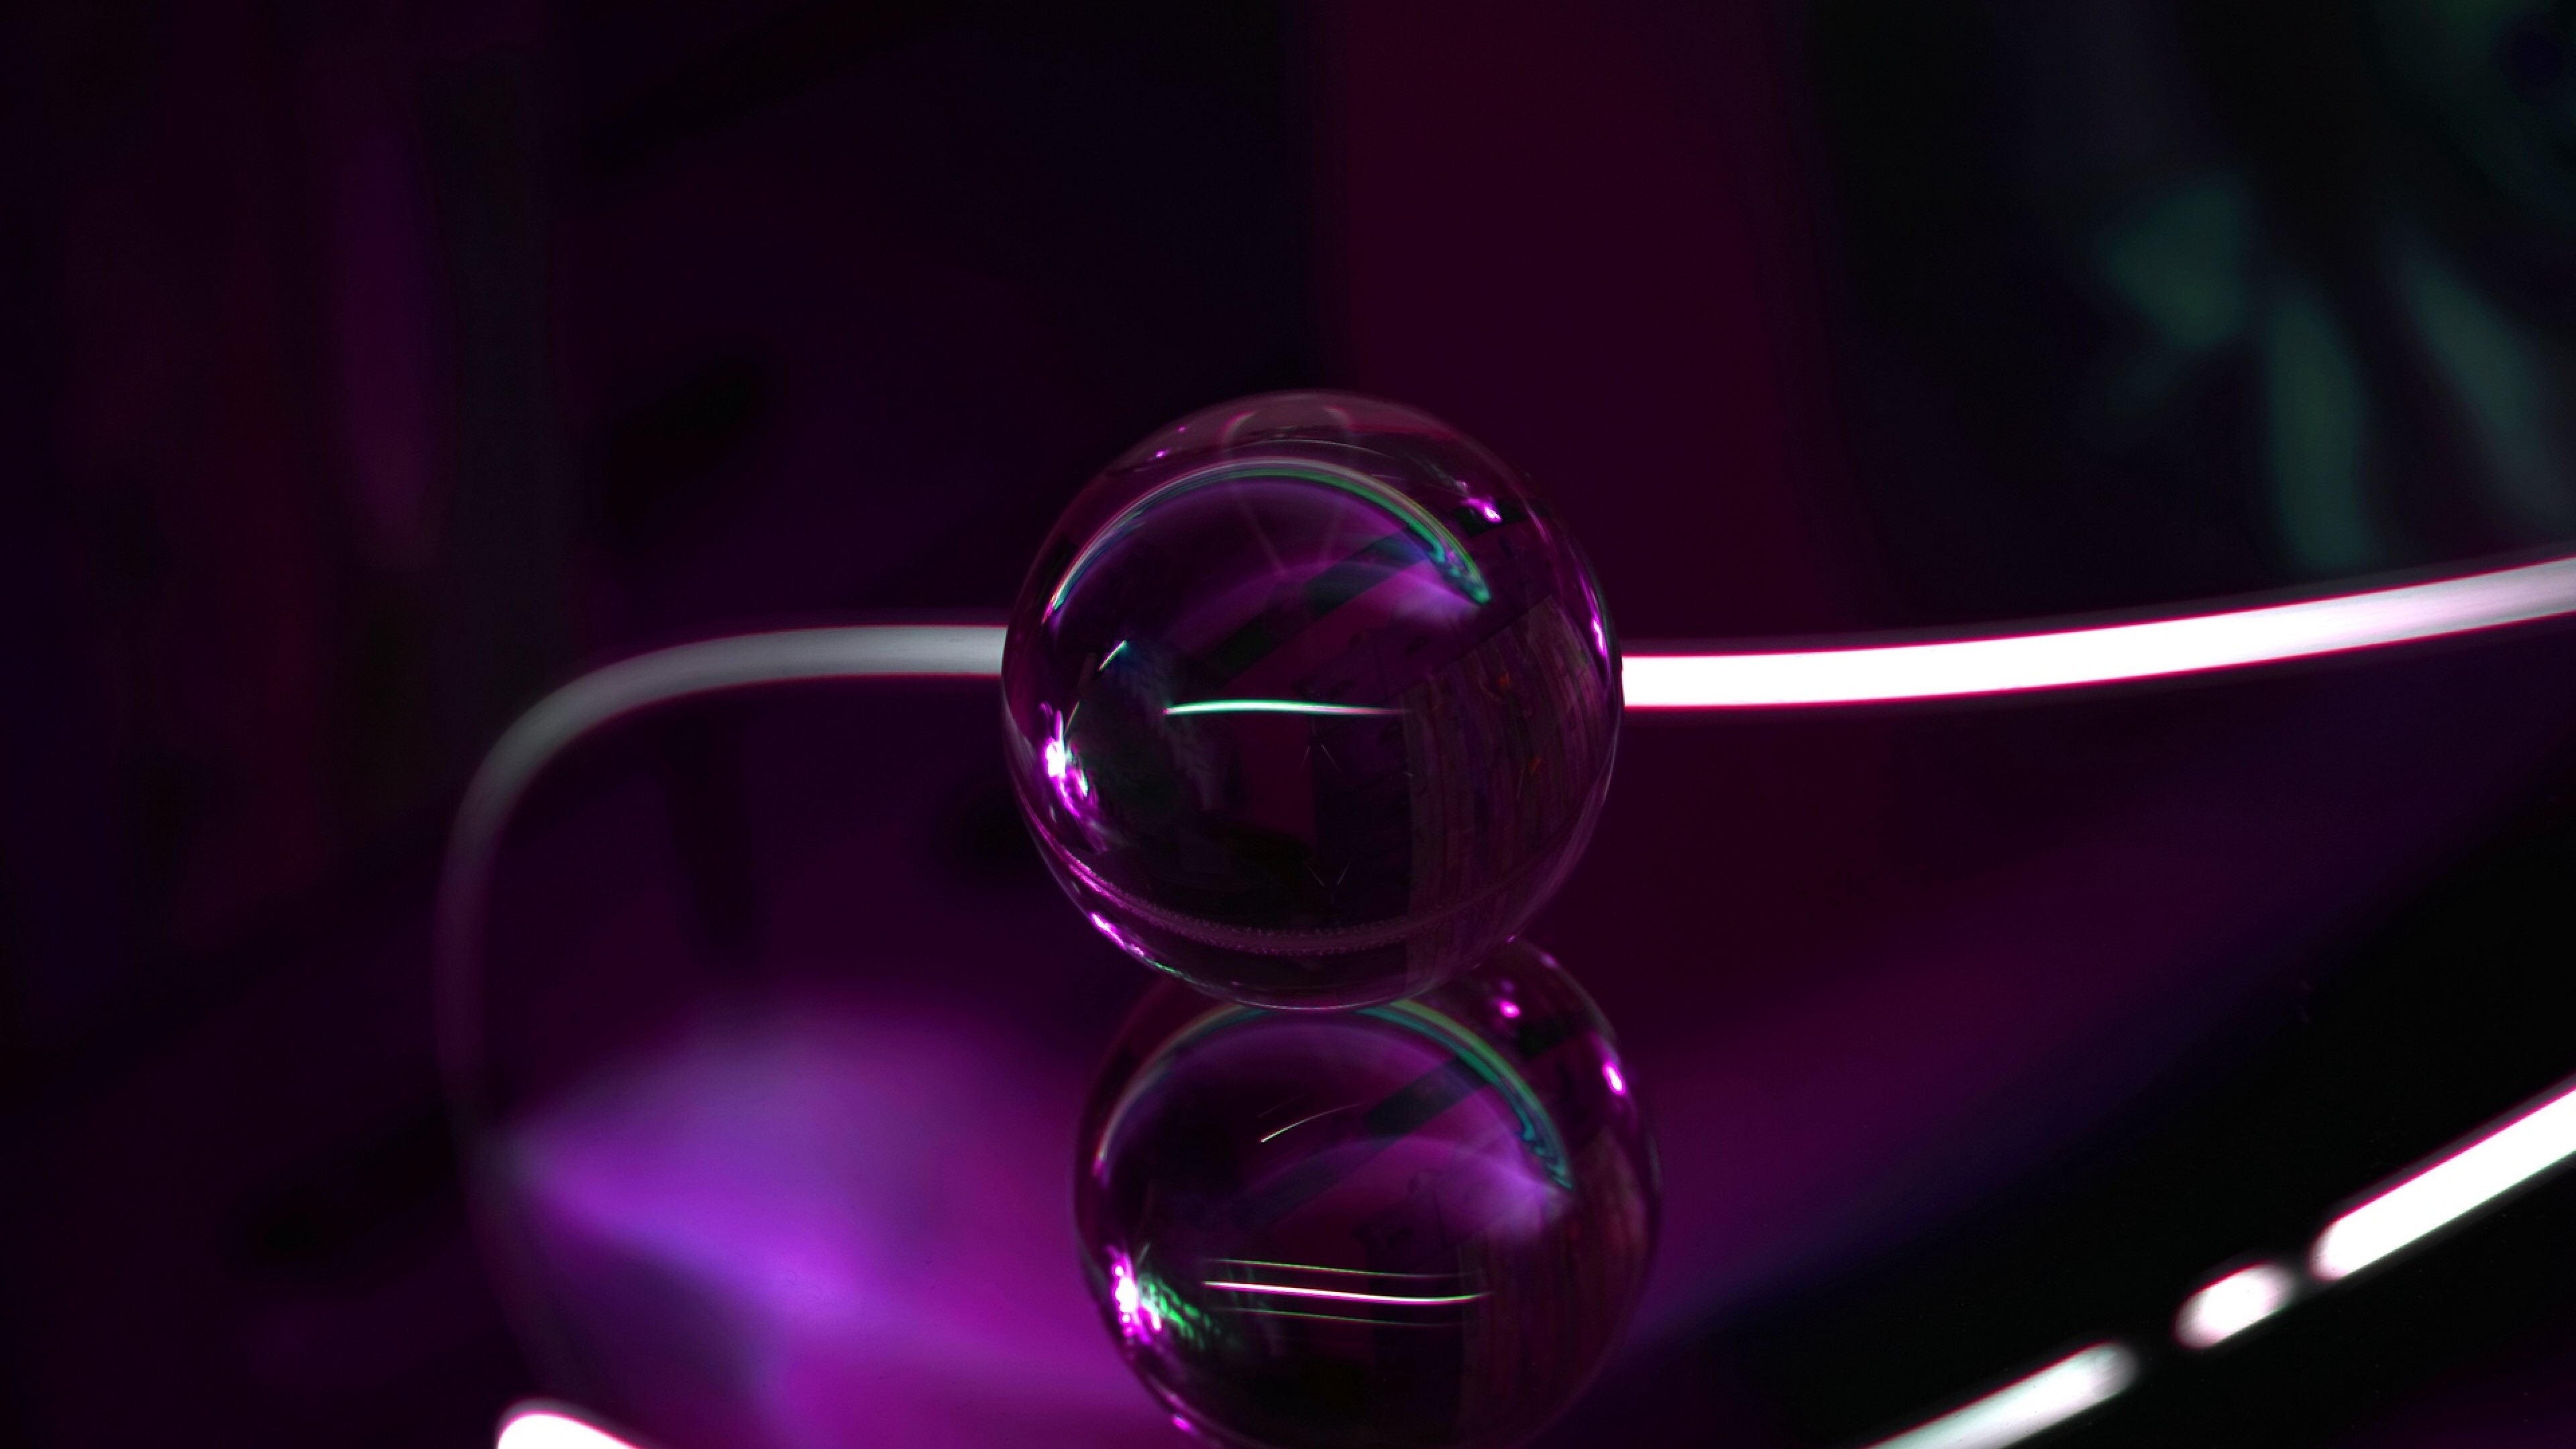 Glass: Purple sleek ball, The substance whose melting temperature from +300 to +2500 °C. 3840x2160 4K Wallpaper.